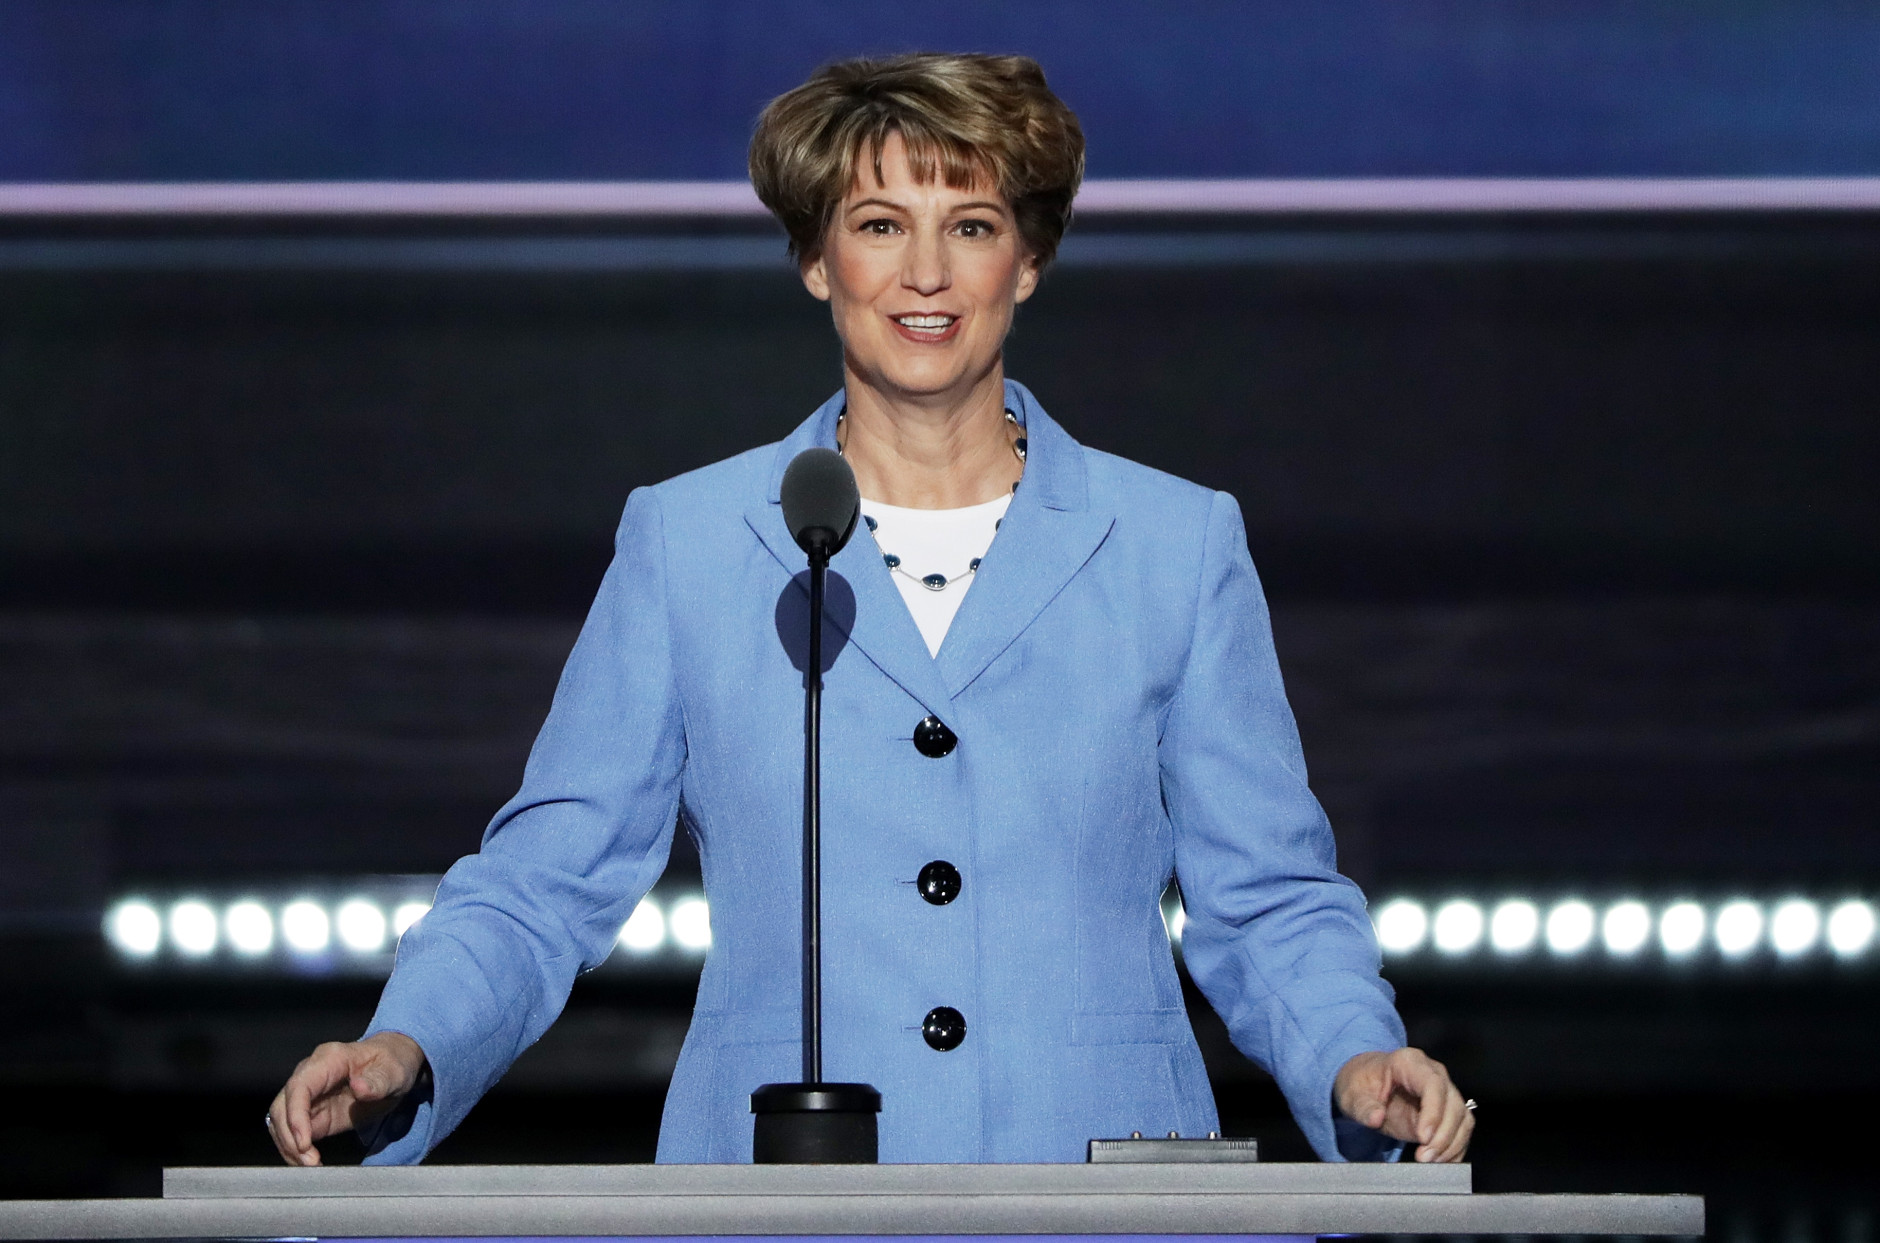 CLEVELAND, OH - JULY 20: Retired Col. Eileen Collins, former NASA Astronaut, delivers a speech on the third day of the Republican National Convention on July 20, 2016 at the Quicken Loans Arena in Cleveland, Ohio. Republican presidential candidate Donald Trump received the number of votes needed to secure the party's nomination. An estimated 50,000 people are expected in Cleveland, including hundreds of protesters and members of the media. The four-day Republican National Convention kicked off on July 18. (Photo by Alex Wong/Getty Images)